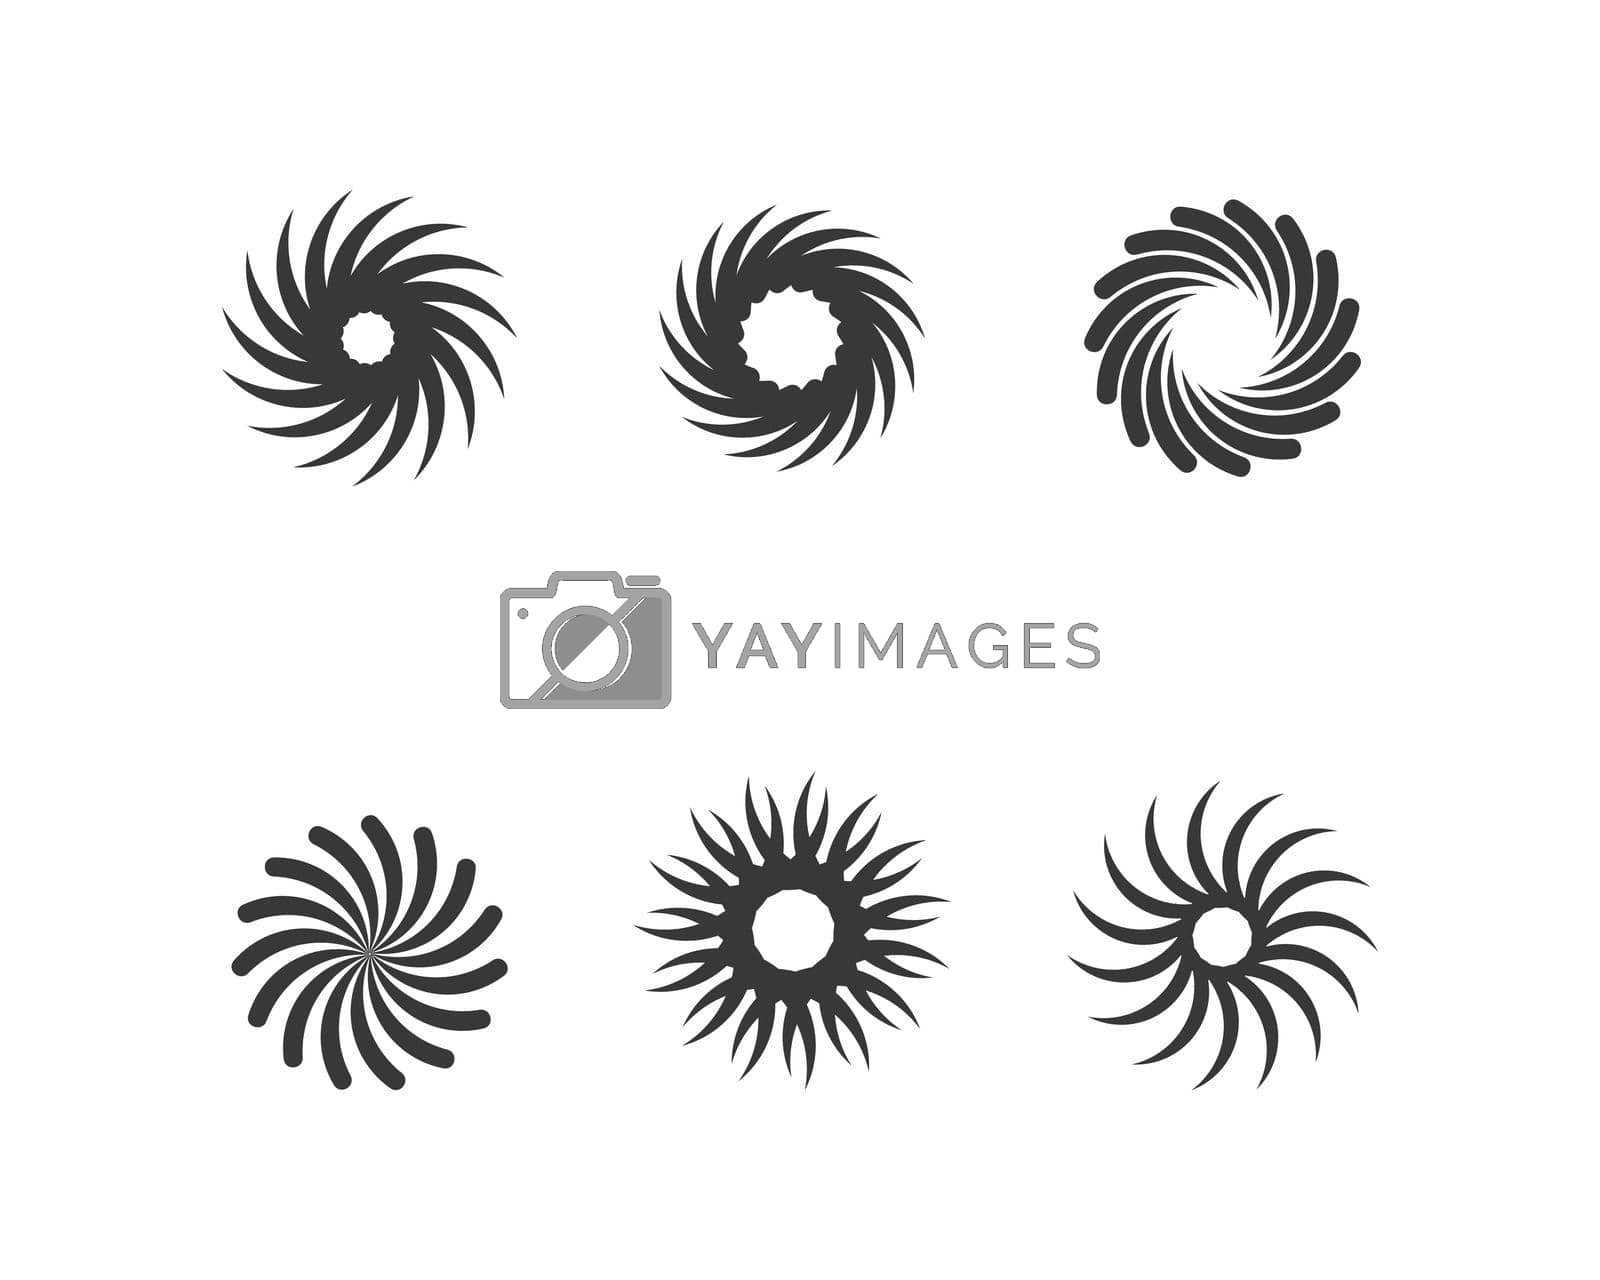 Royalty free image of Business logo, vortex, spiral icon vector by awk